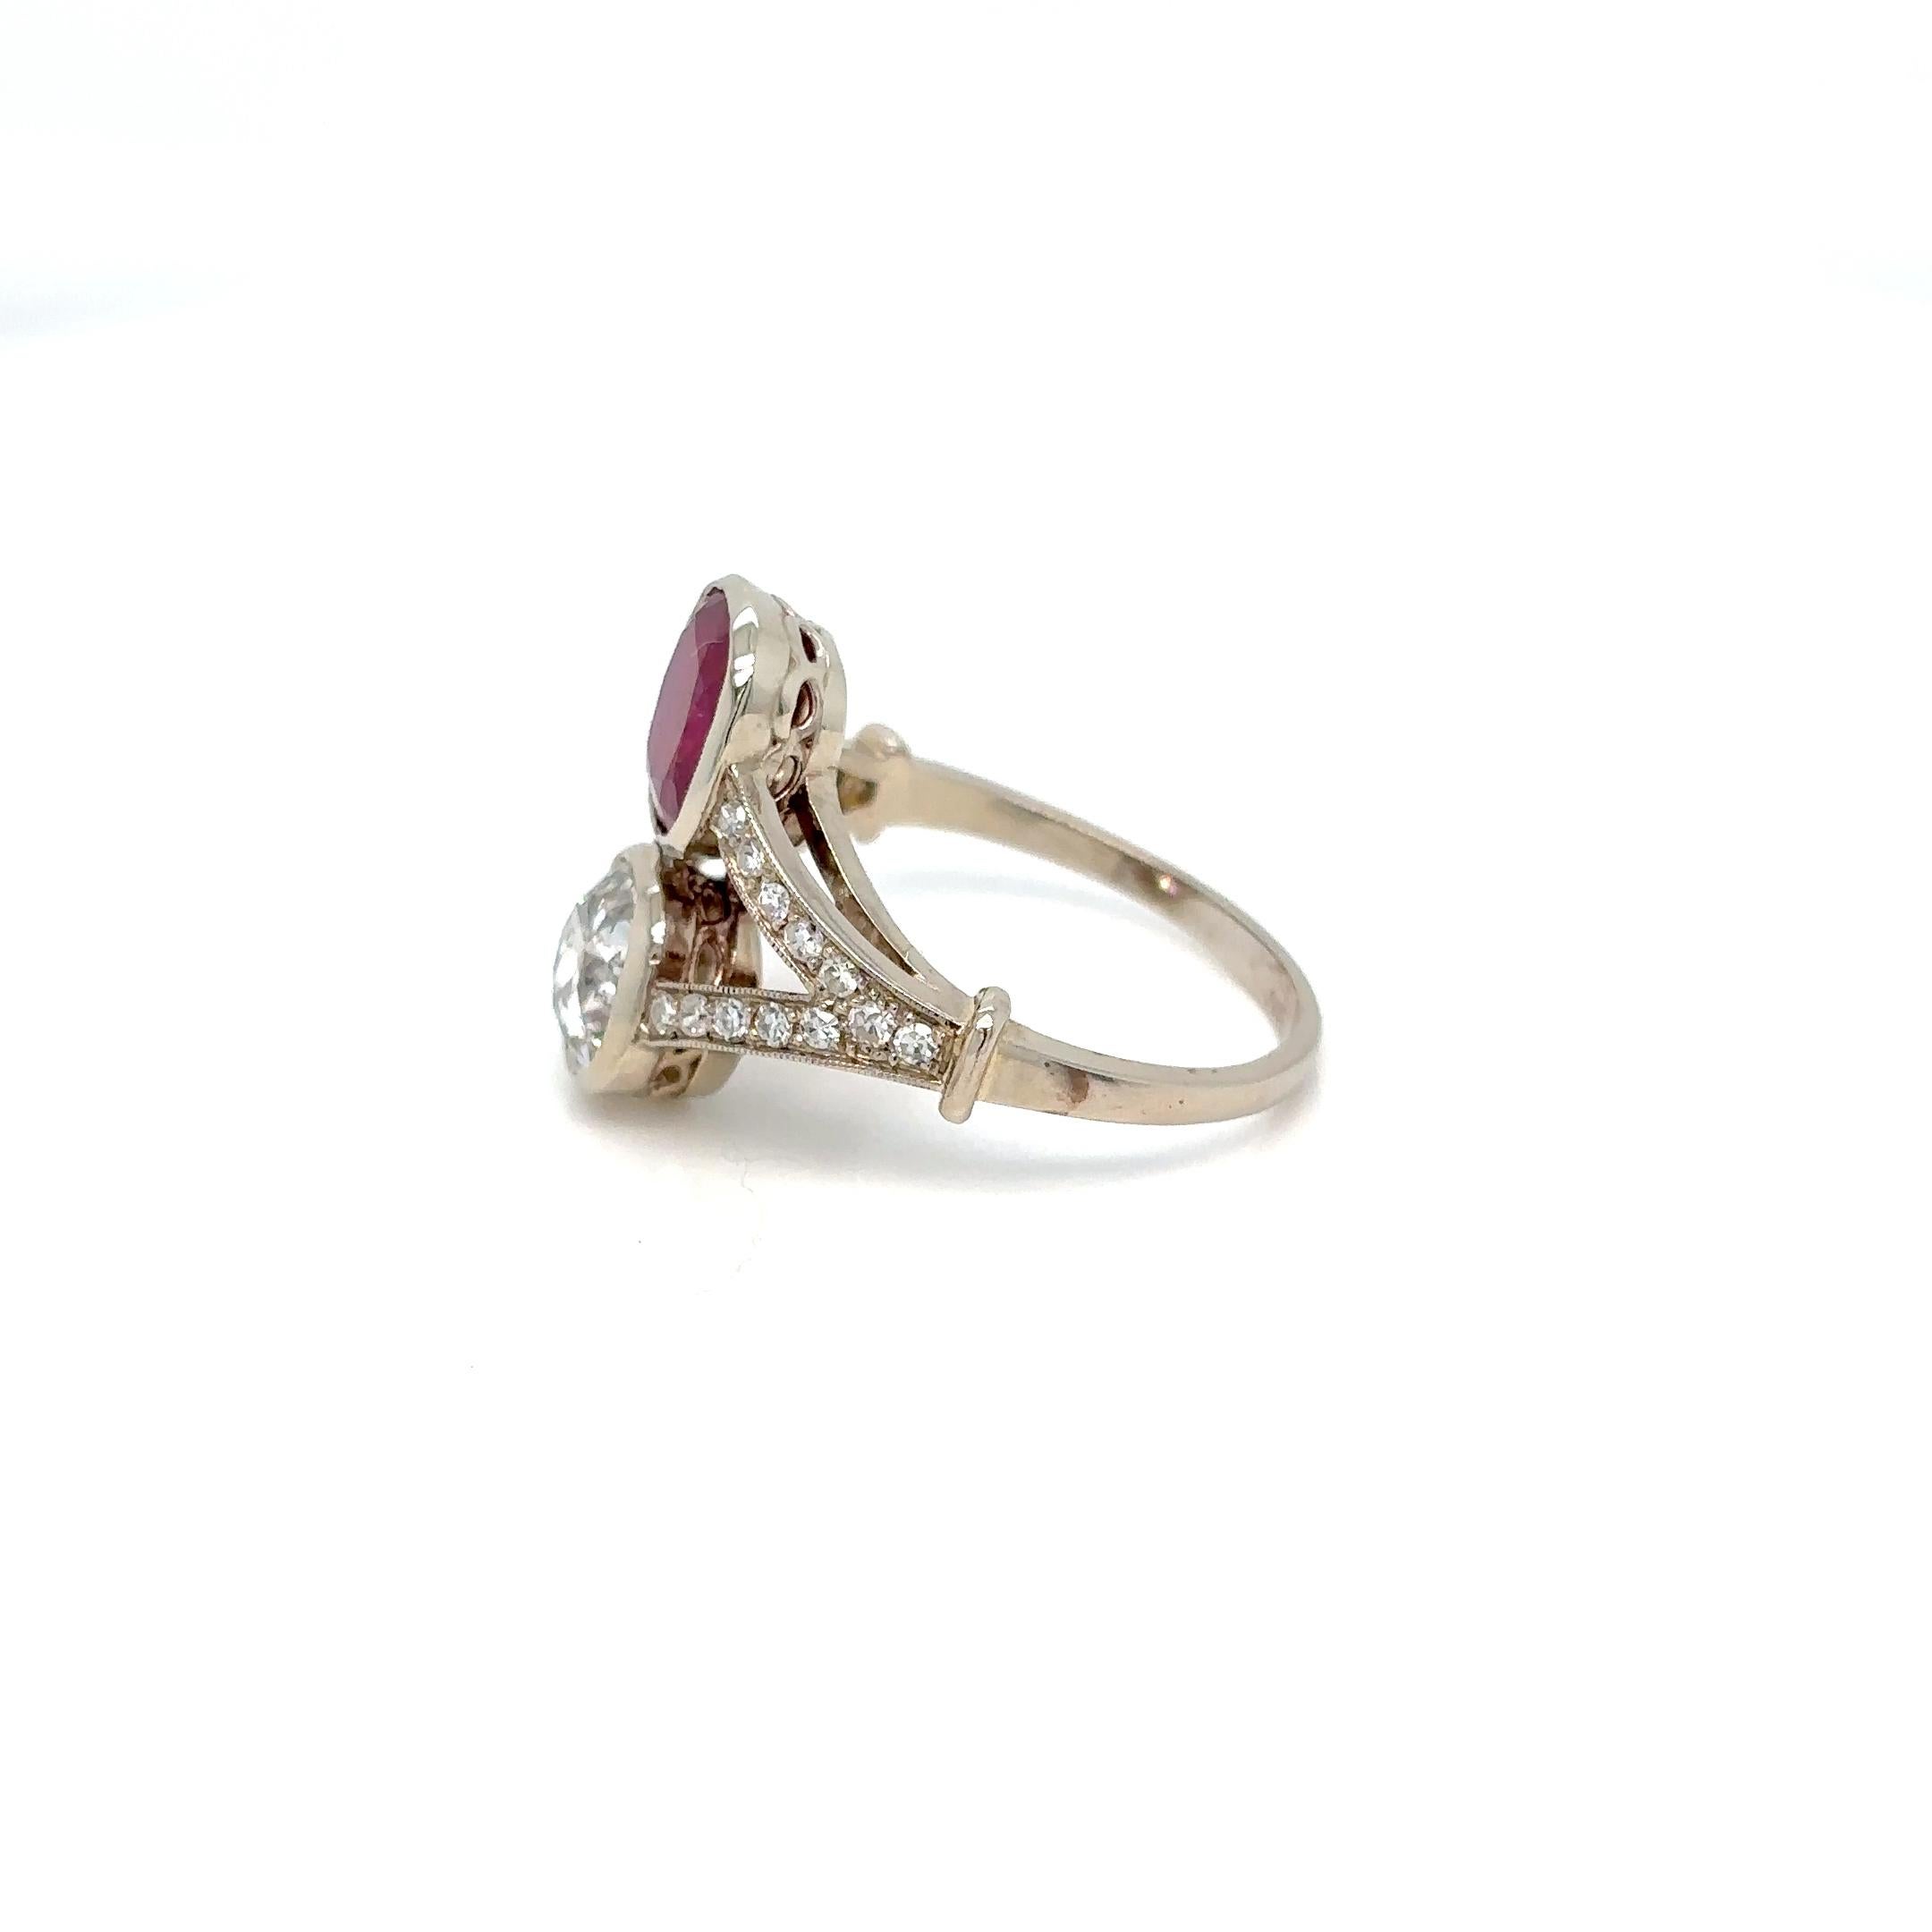 Victorian Certified Natural Unheated Ruby Diamond Vous et Moi Ring For Sale 2